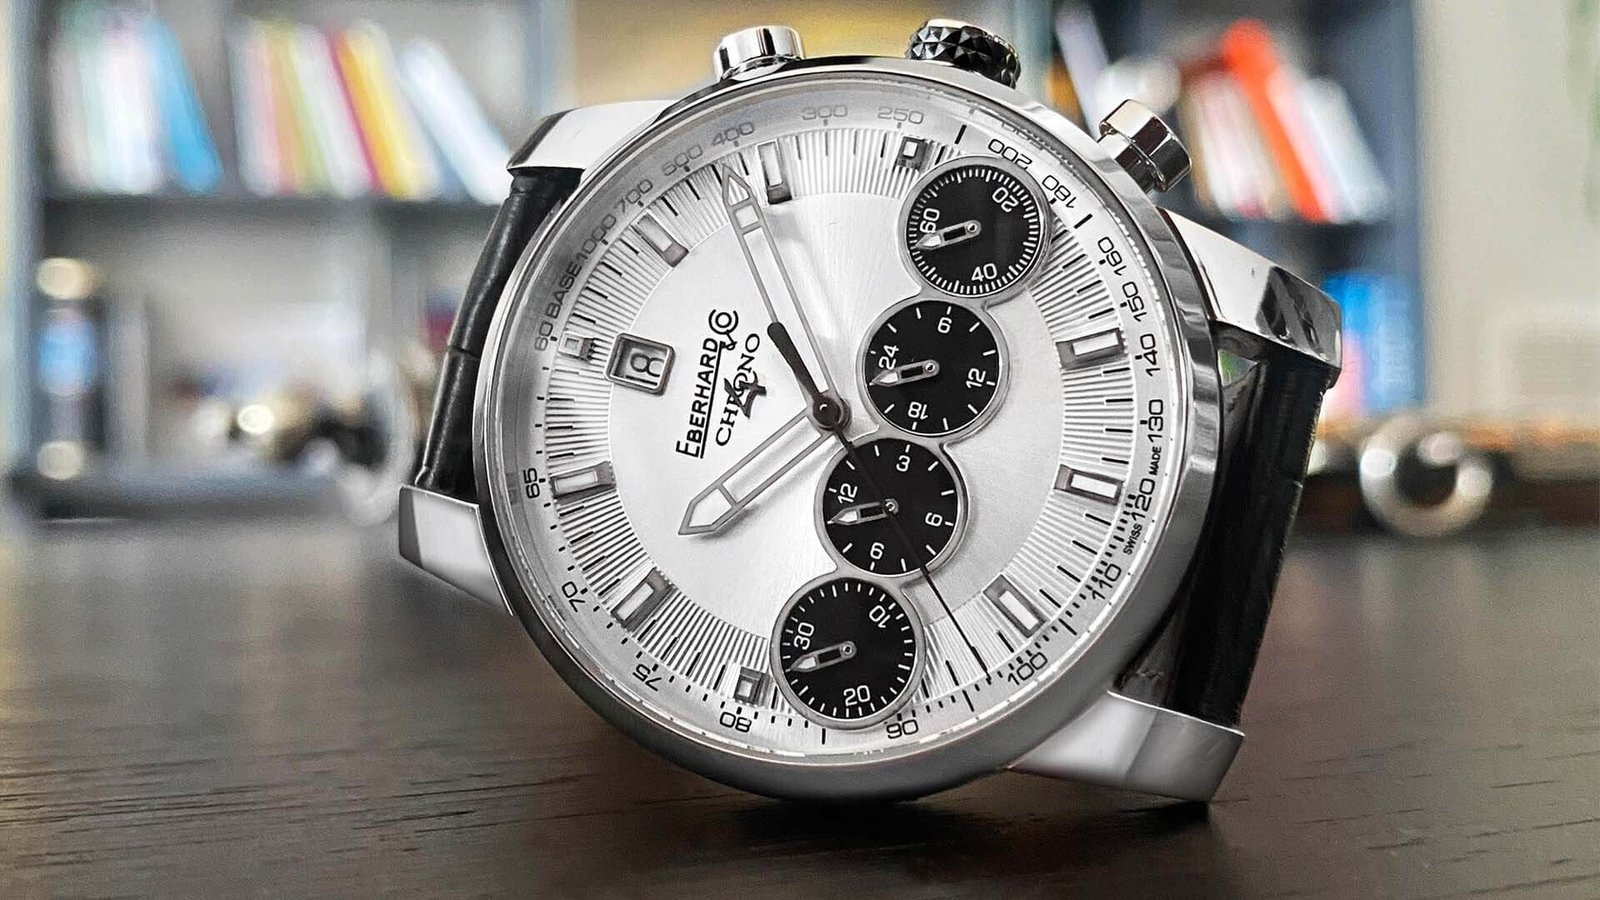 <div>Happy Birthday: 20 years of Chrono 4 & the New Edition “21-42” by EBERHARD & CO.</div>